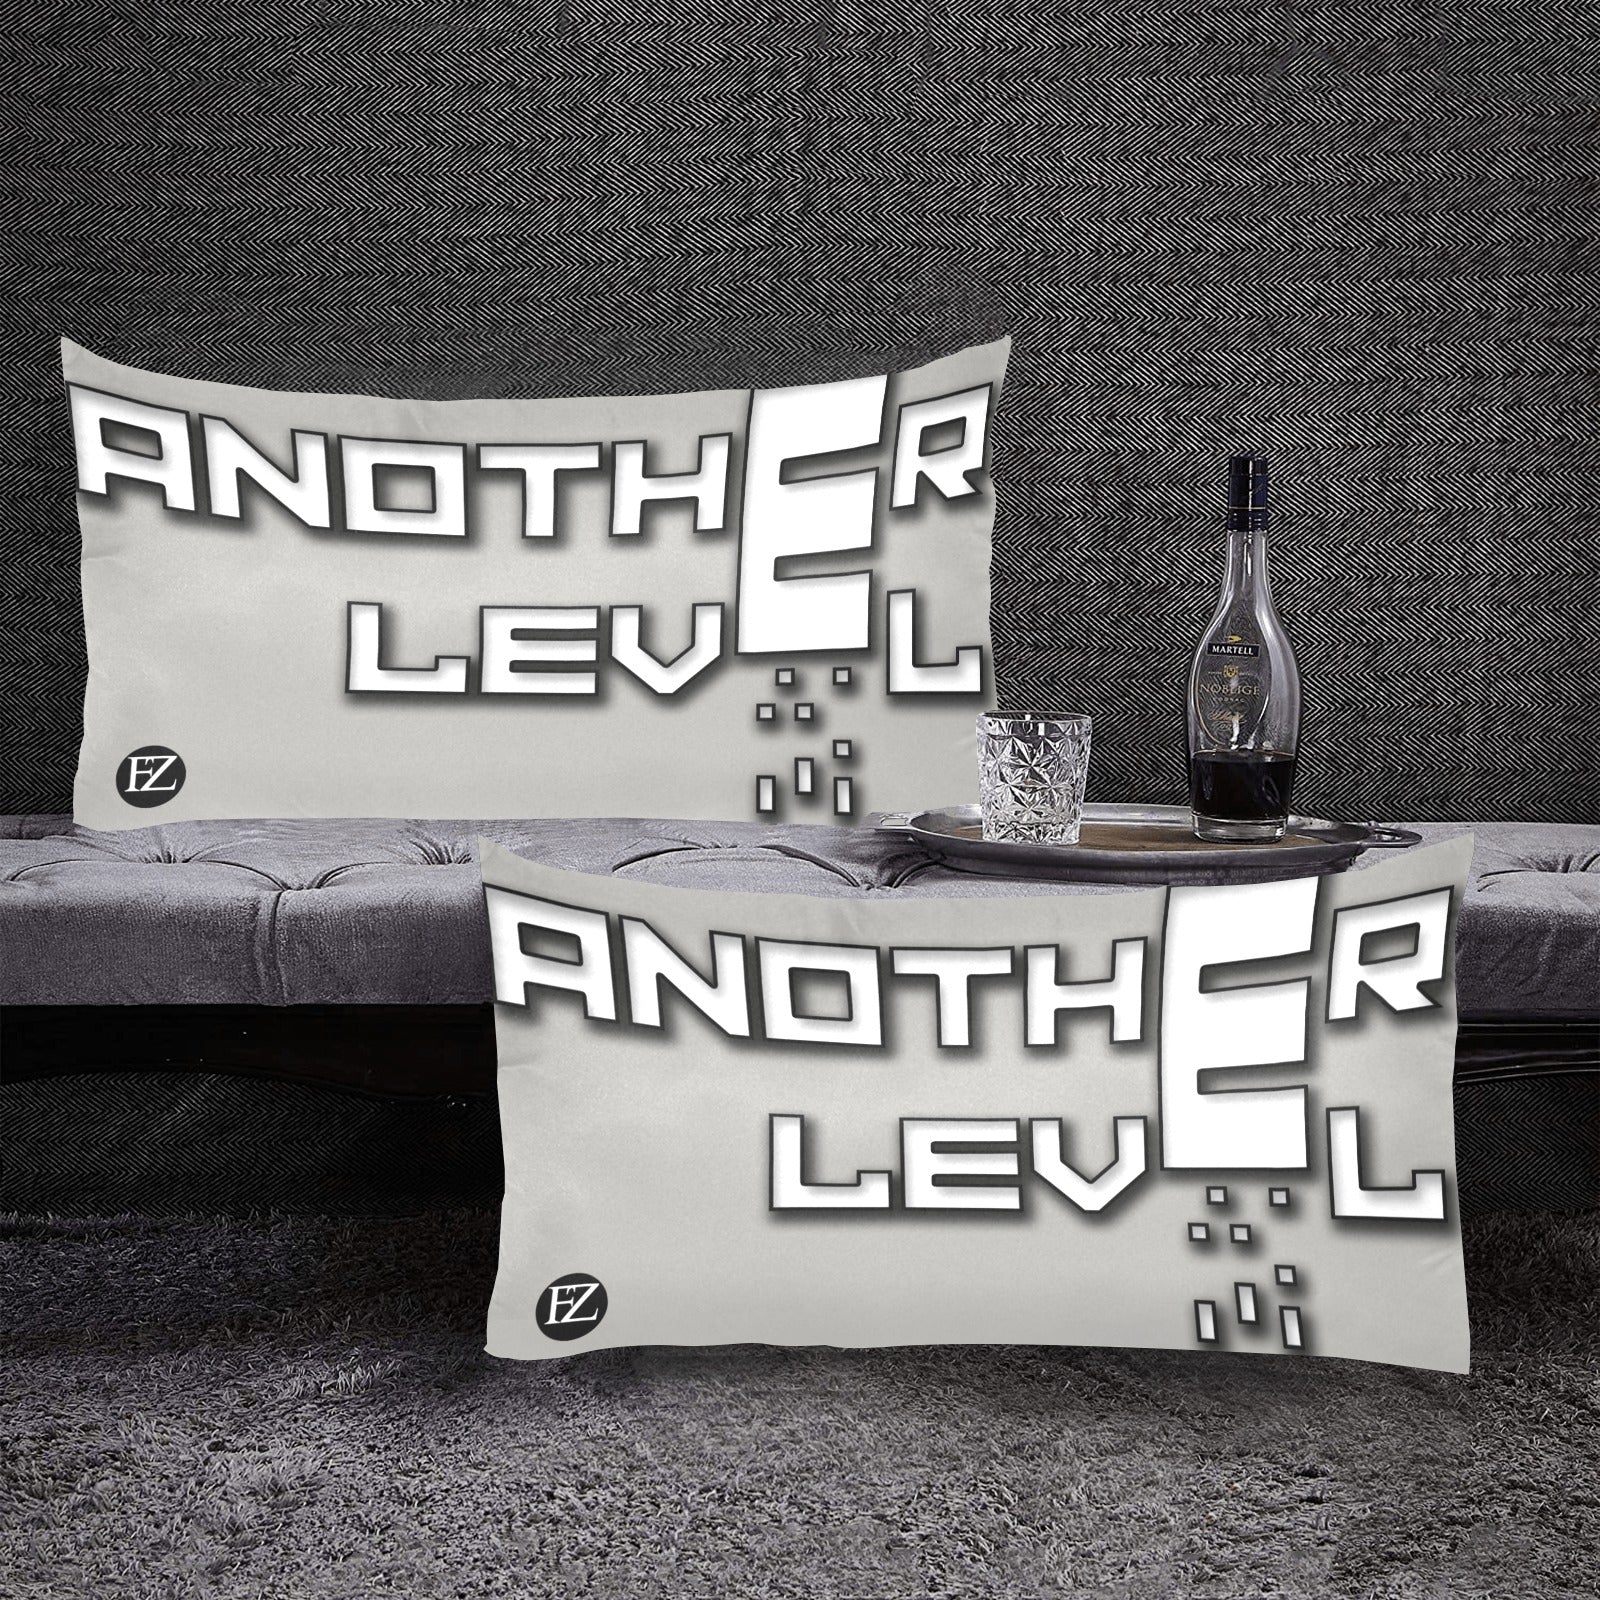 fz levels pillow case one size / fz levels pillow case - grey rectangle pillow cases 20"x36"(one side)(pack of 2)